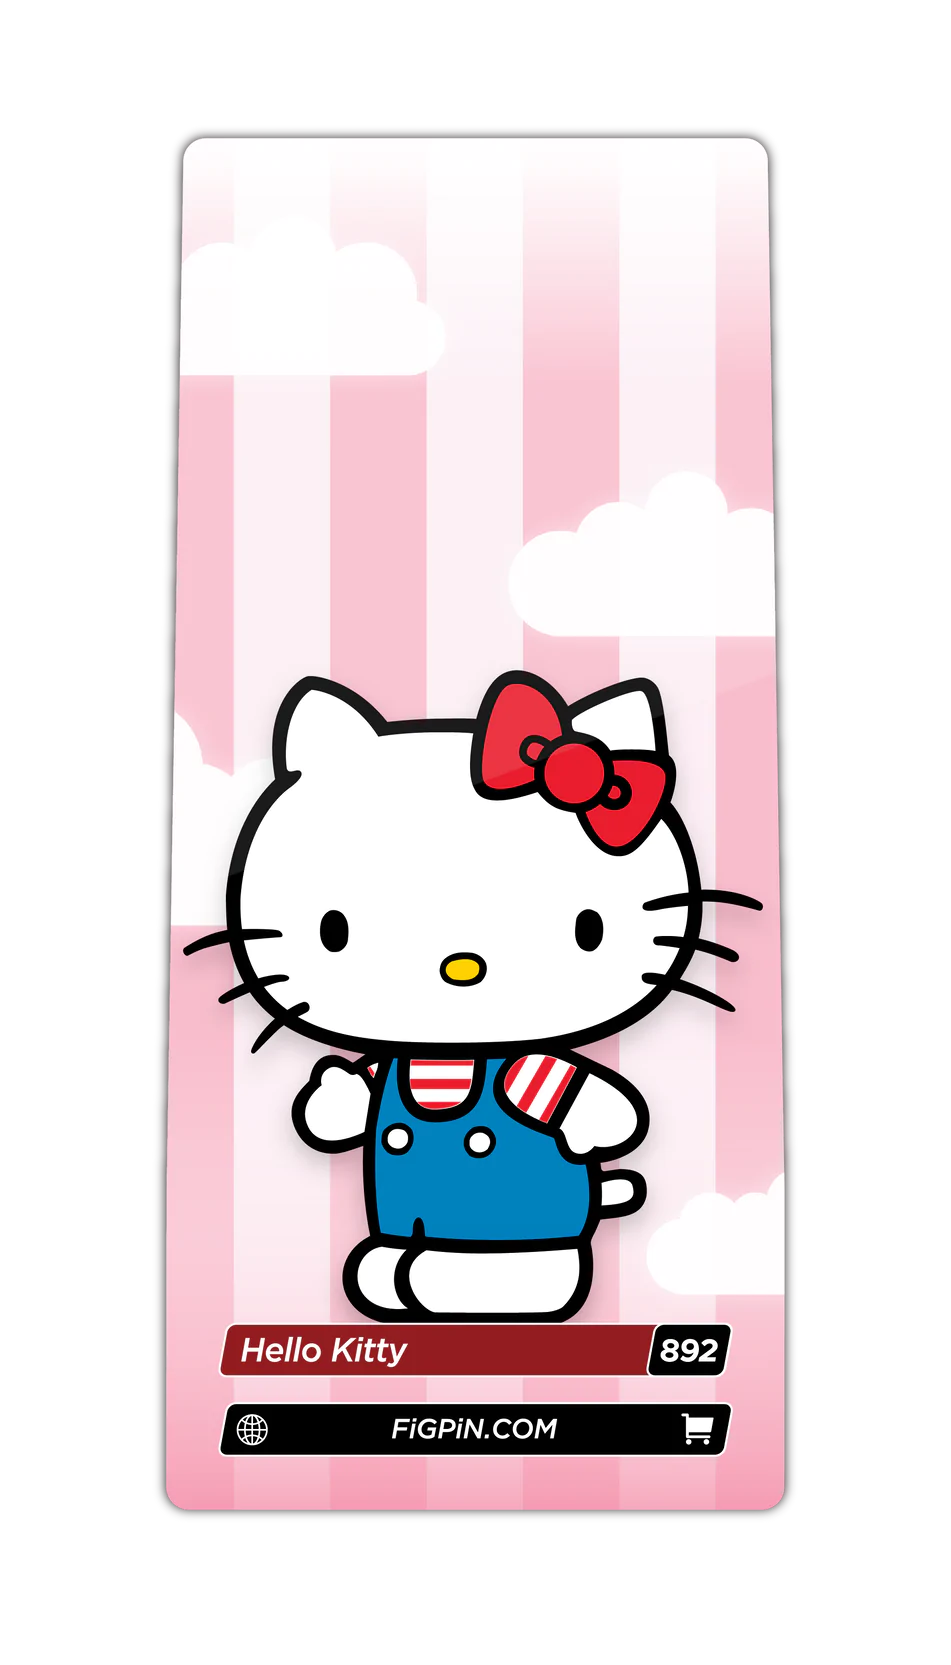 HELLO KITTY AND FRIENDS - HELLO KITTY 892 FIGPIN